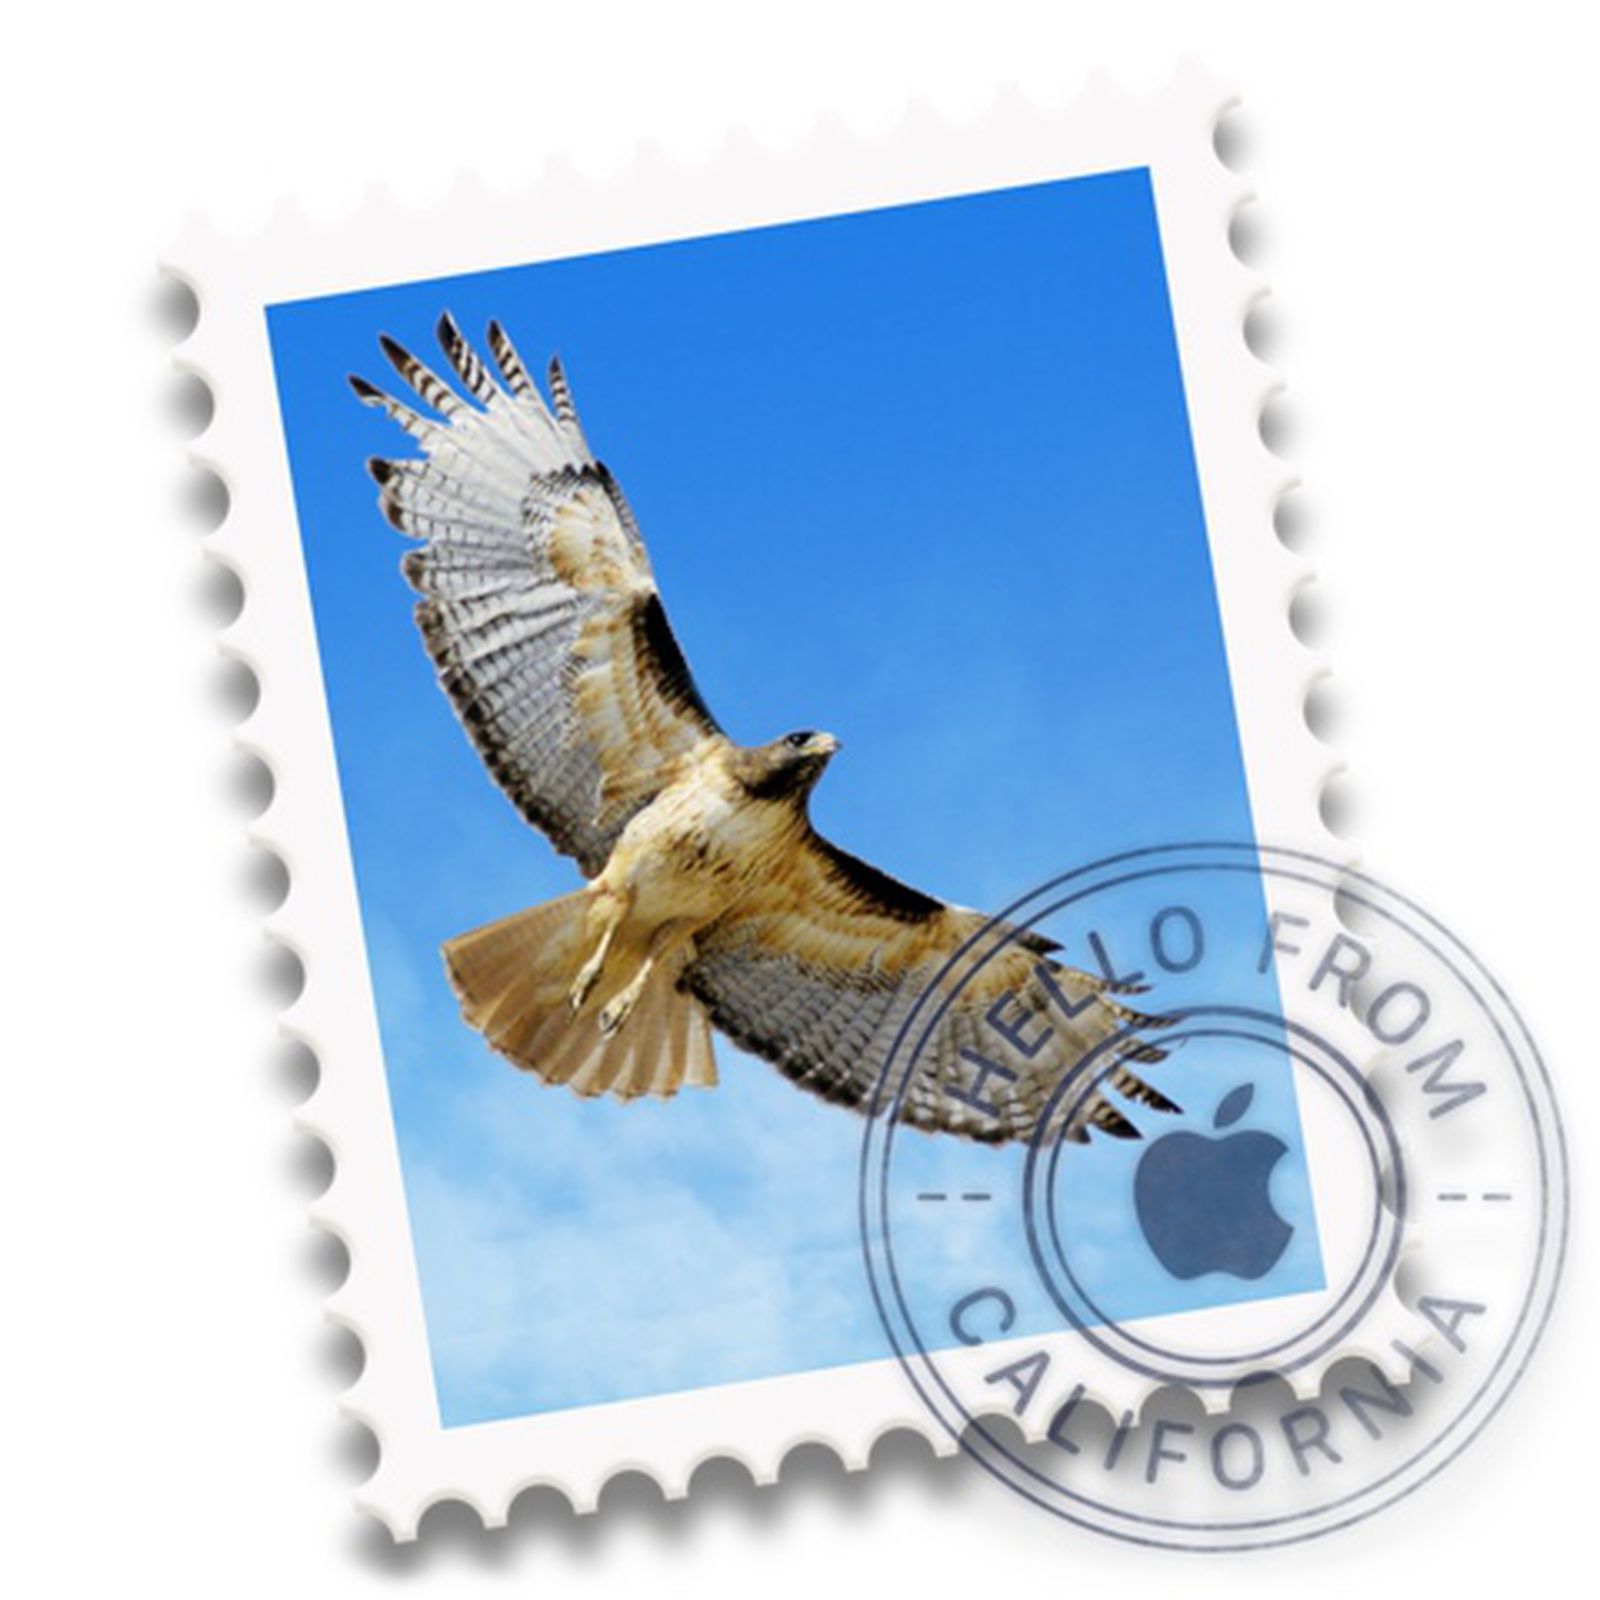 email clients for mac os x